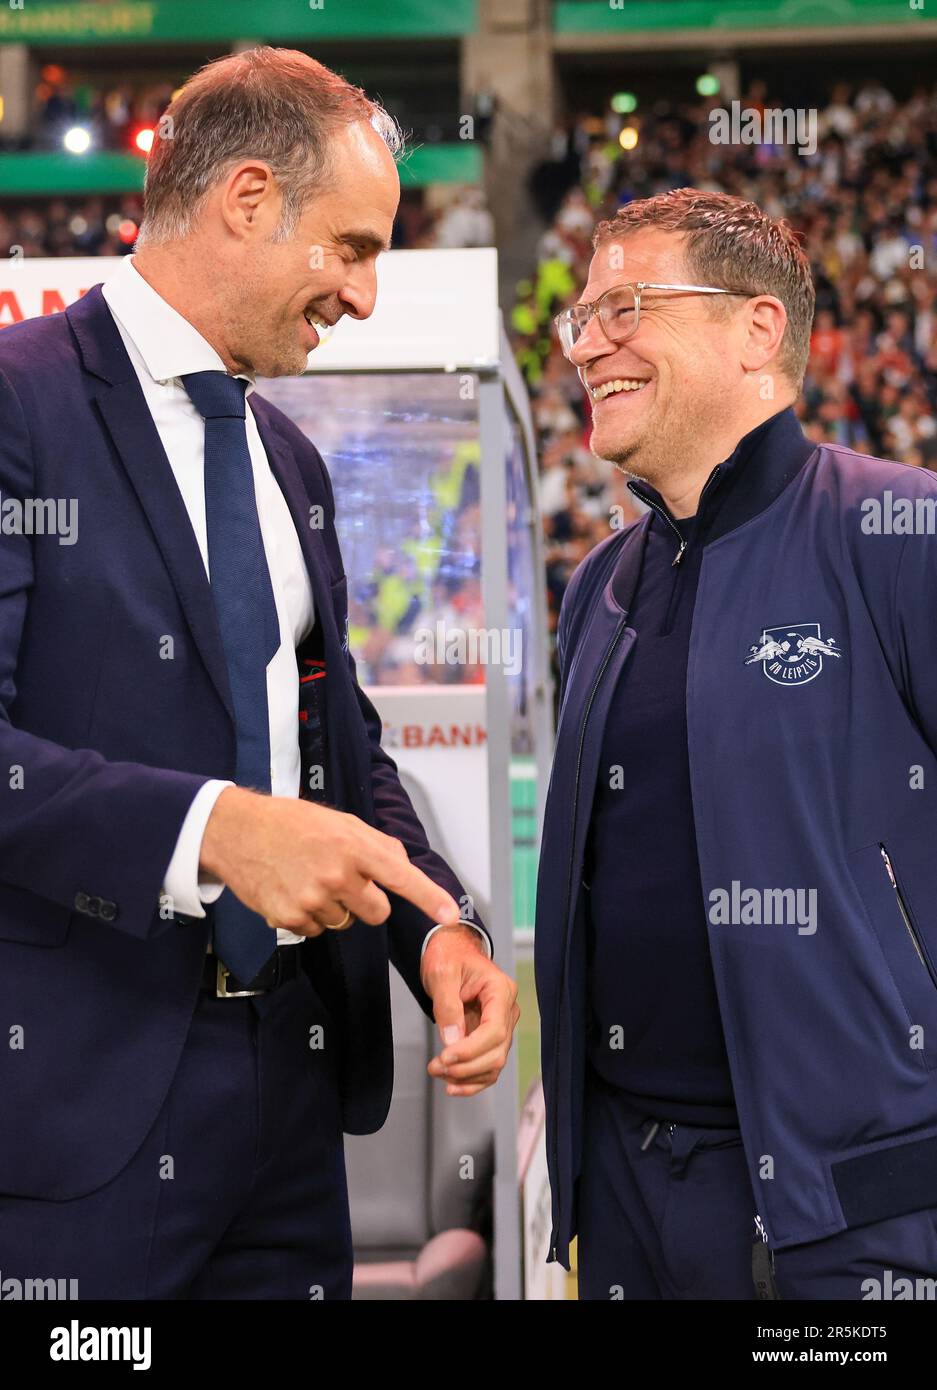 Berlin, Germany. 03rd June, 2023. Soccer: DFB Cup, final, RB Leipzig - Eintracht Frankfurt at the Olympiastadion. Leipzig's Oliver Mintzlaff (l), Managing Director Red Bull, and Max Eberl, Managing Director Sport, talk after the match. Credit: Jan Woitas/dpa - IMPORTANT NOTE: In accordance with the requirements of the DFL Deutsche Fußball Liga and the DFB Deutscher Fußball-Bund, it is prohibited to use or have used photographs taken in the stadium and/or of the match in the form of sequence pictures and/or video-like photo series./dpa/Alamy Live News Stock Photo